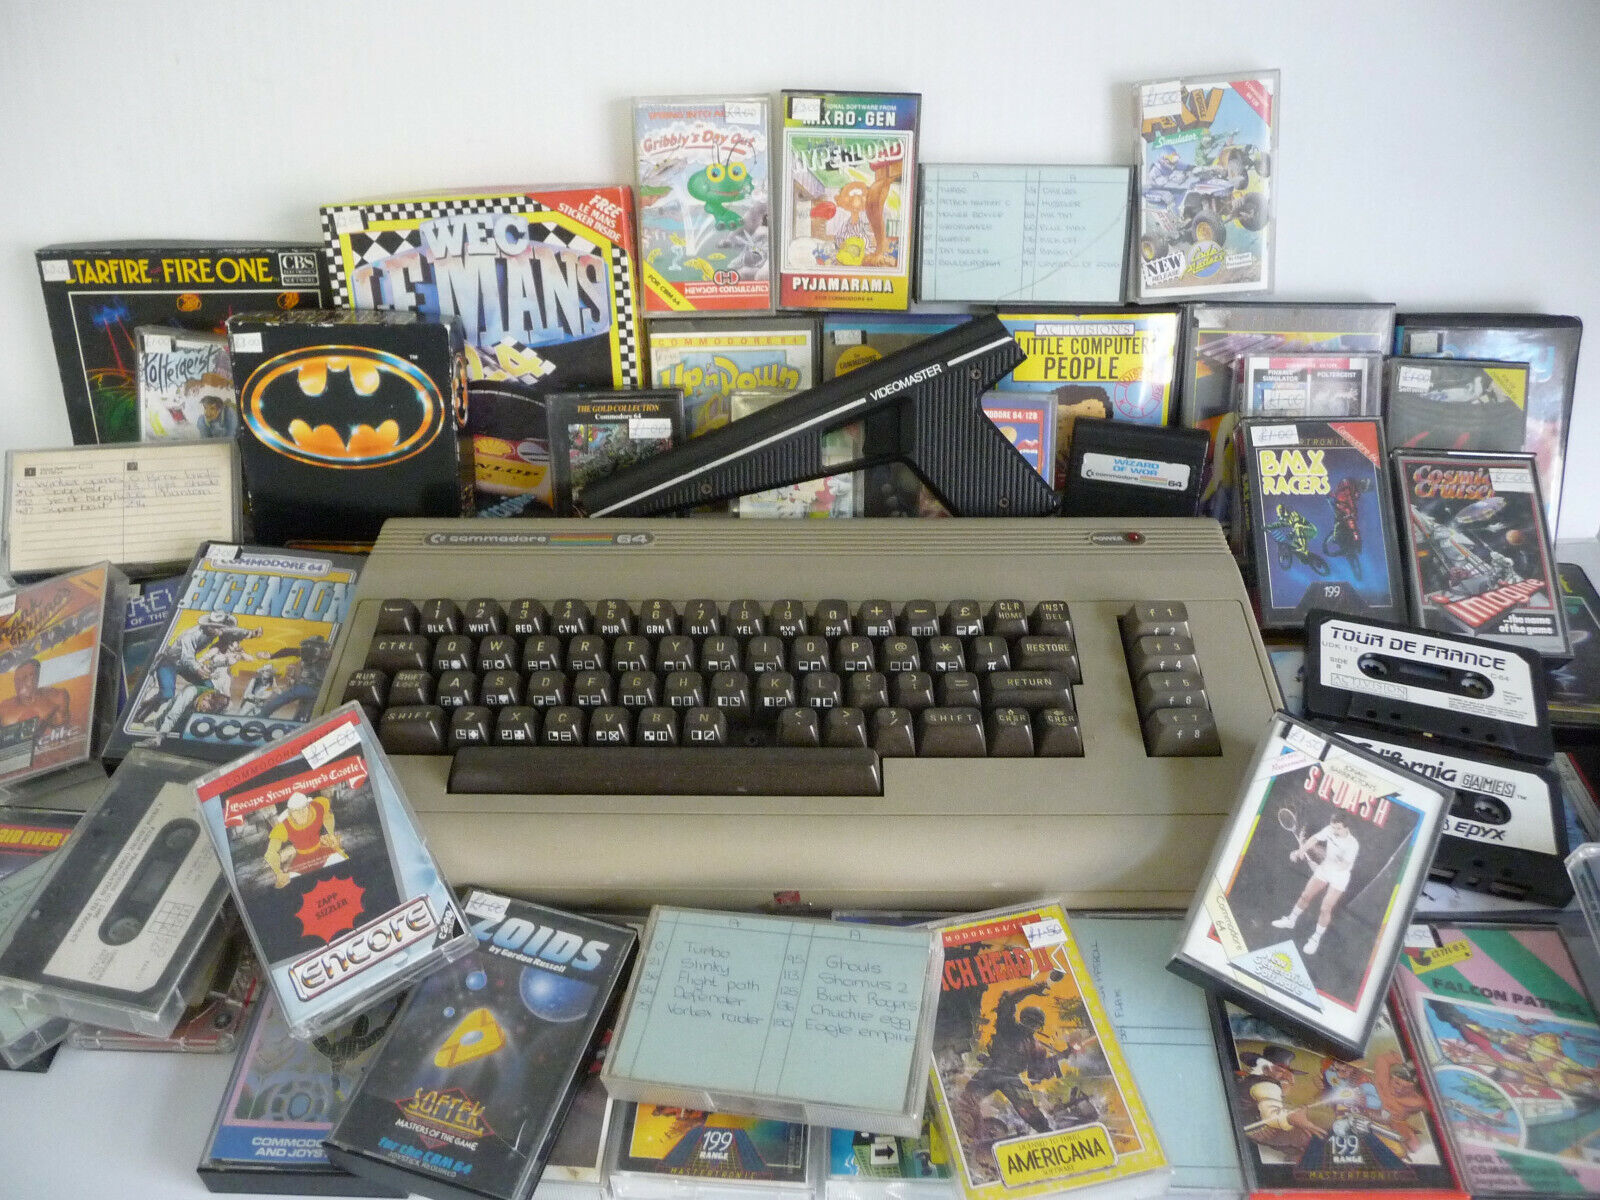 Commodore 64 home computer & LARGE collection of Vintage gaming games 1980\'s era